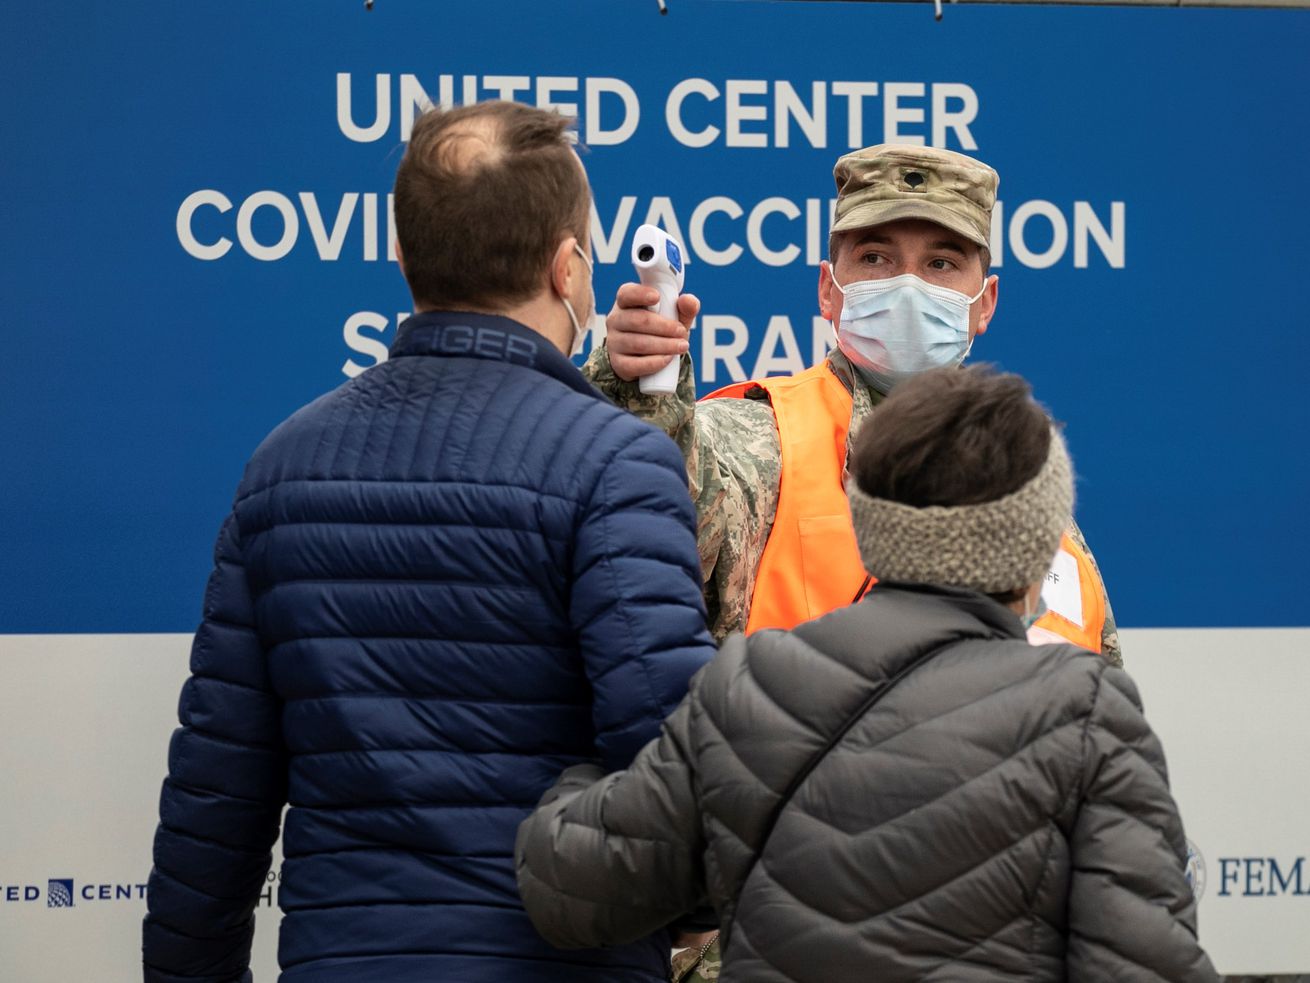 U.S.-CHICAGO-MASS VACCINATION SITE-OPENING